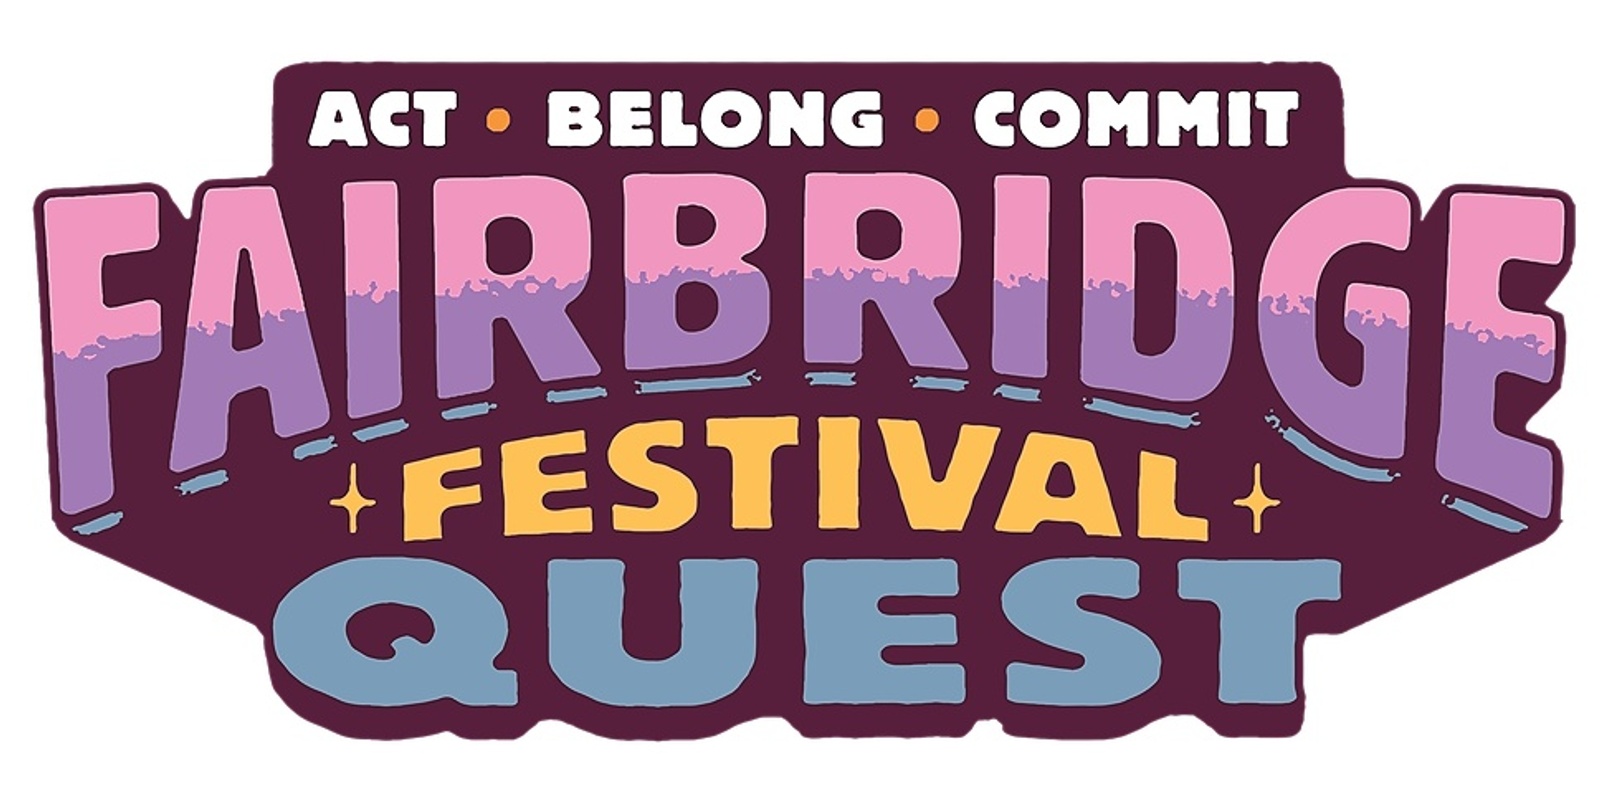 Mandurah Youth Songwriting Workshop Series: Presented by Act Belong Commit Fairbridge Festival Quest